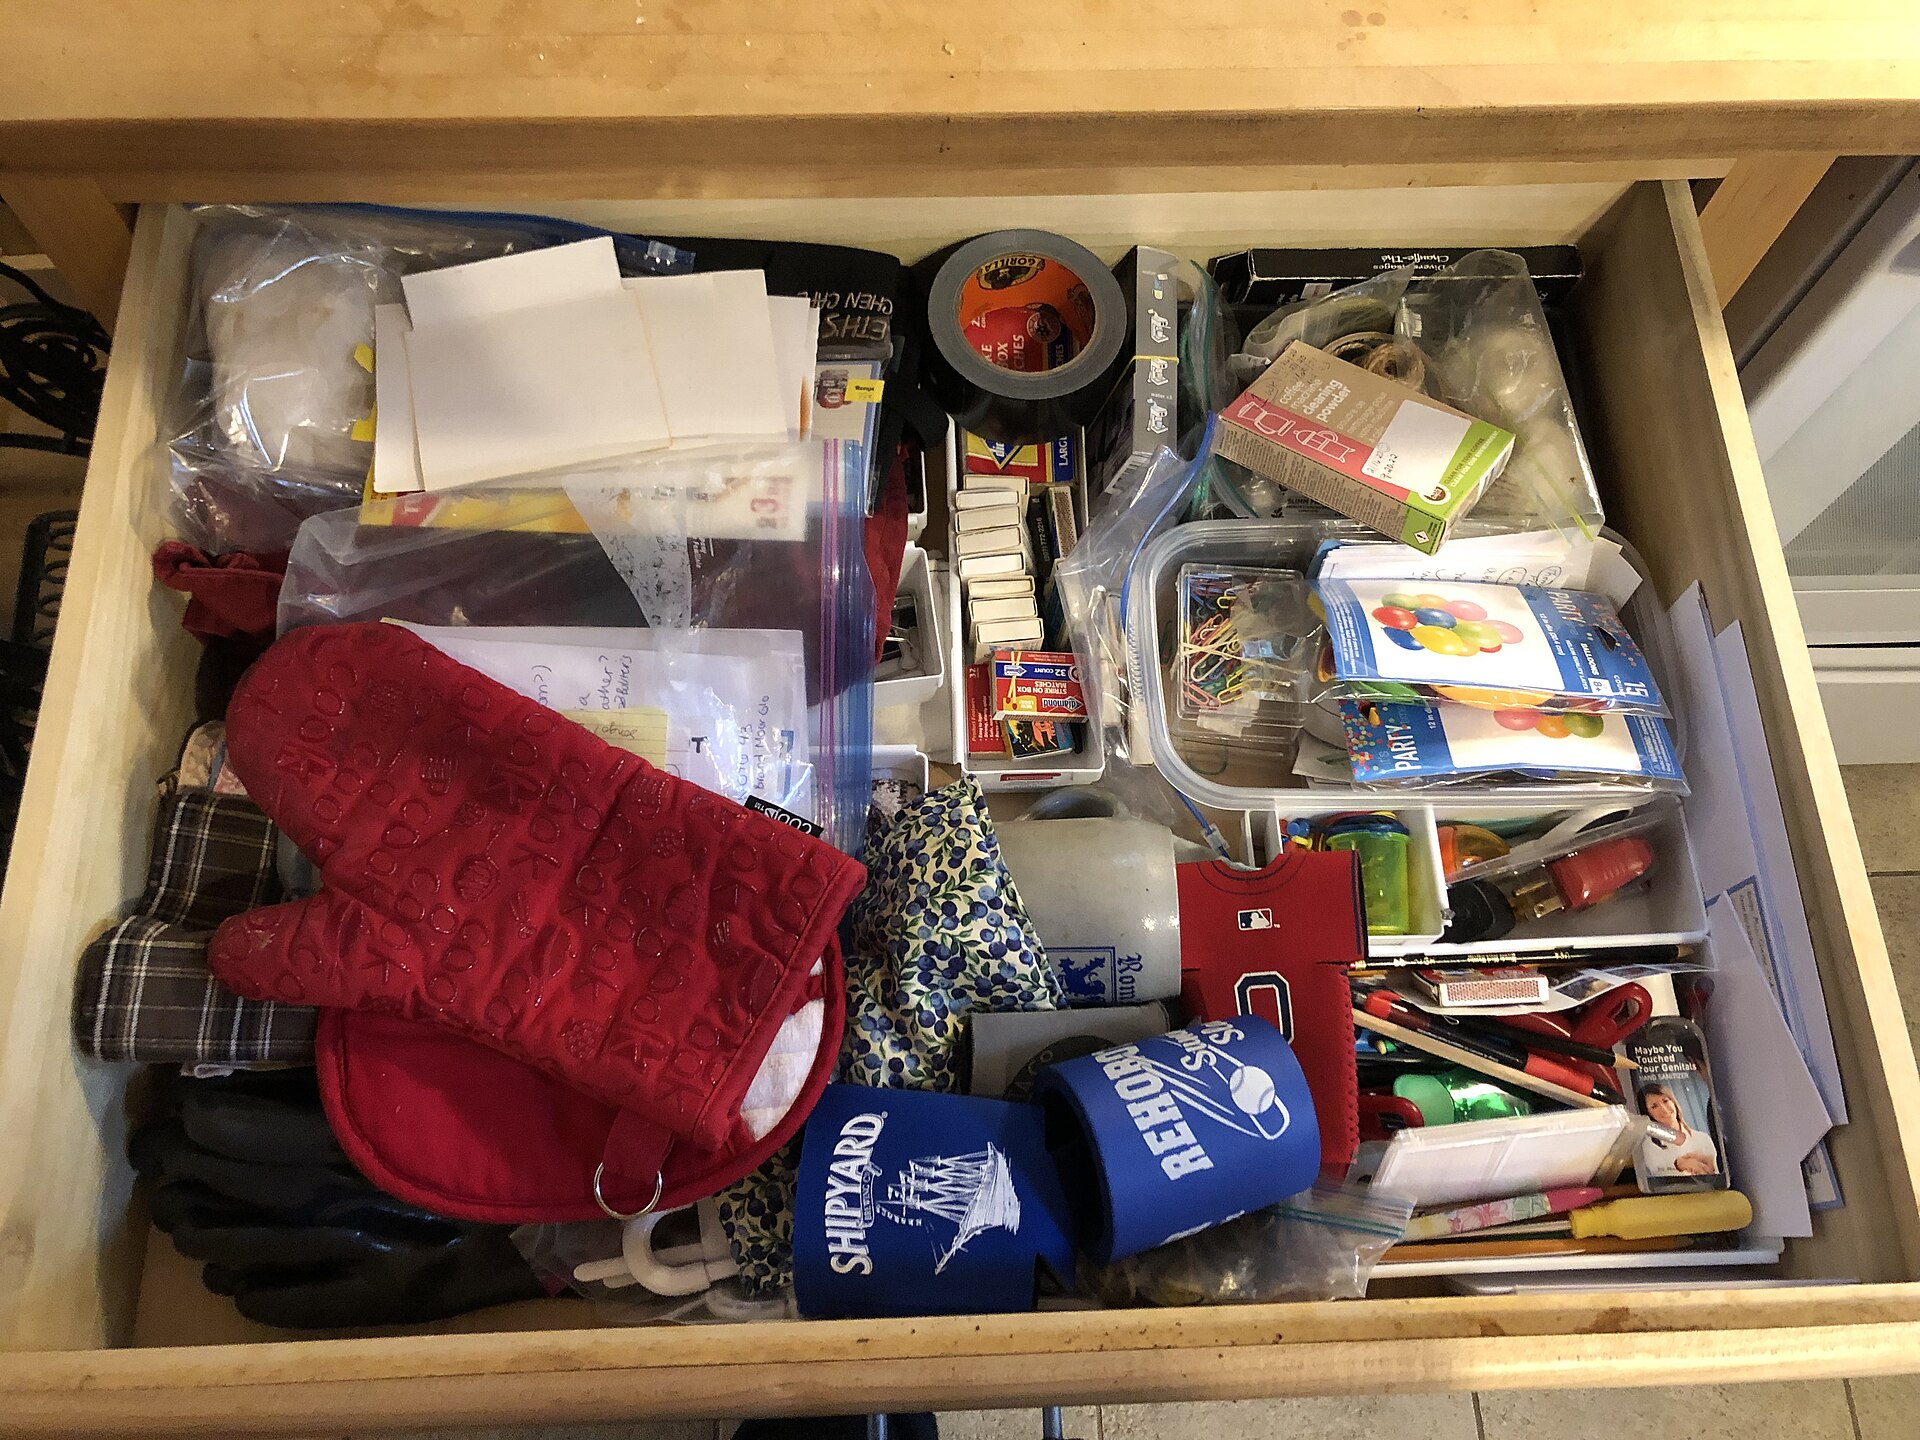 The junk drawer, where you put things you want to hold onto but don’t have a place for